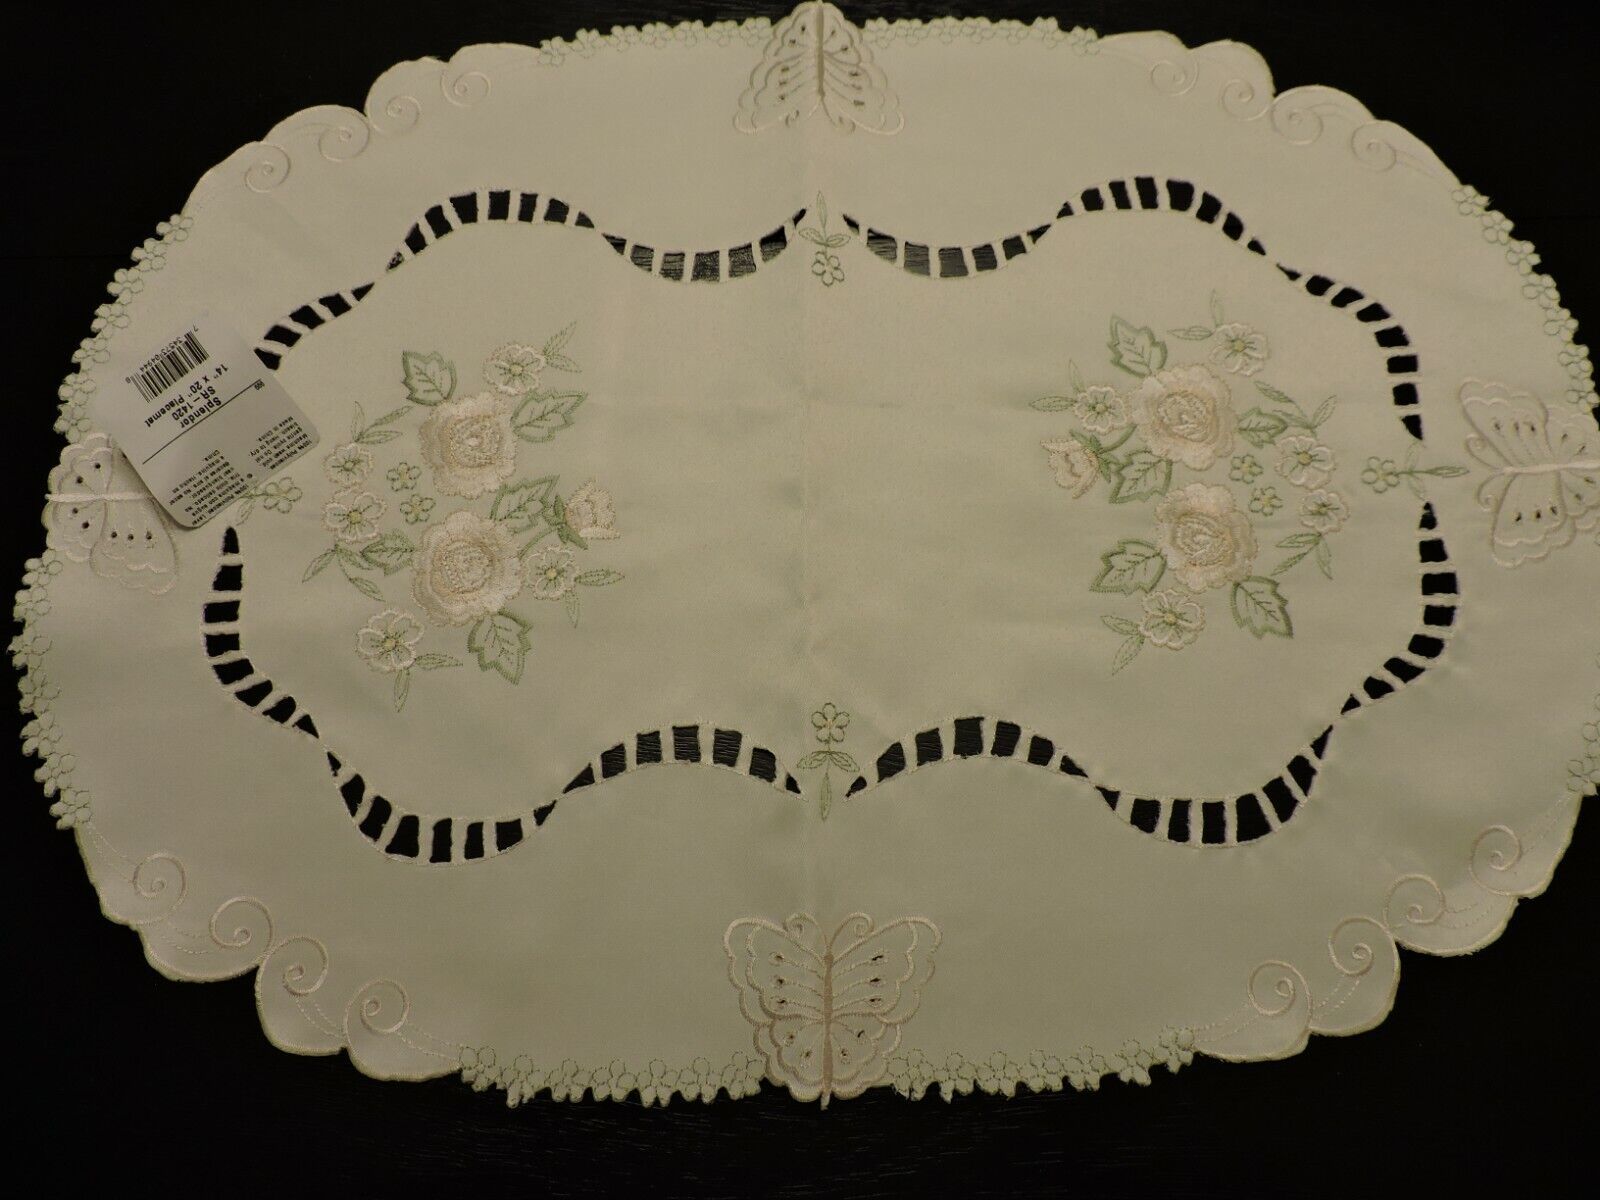 Heritage Lace Splendor Placemat Doily Cream Embroidered Butterfly Floral 14x20  - $11.99